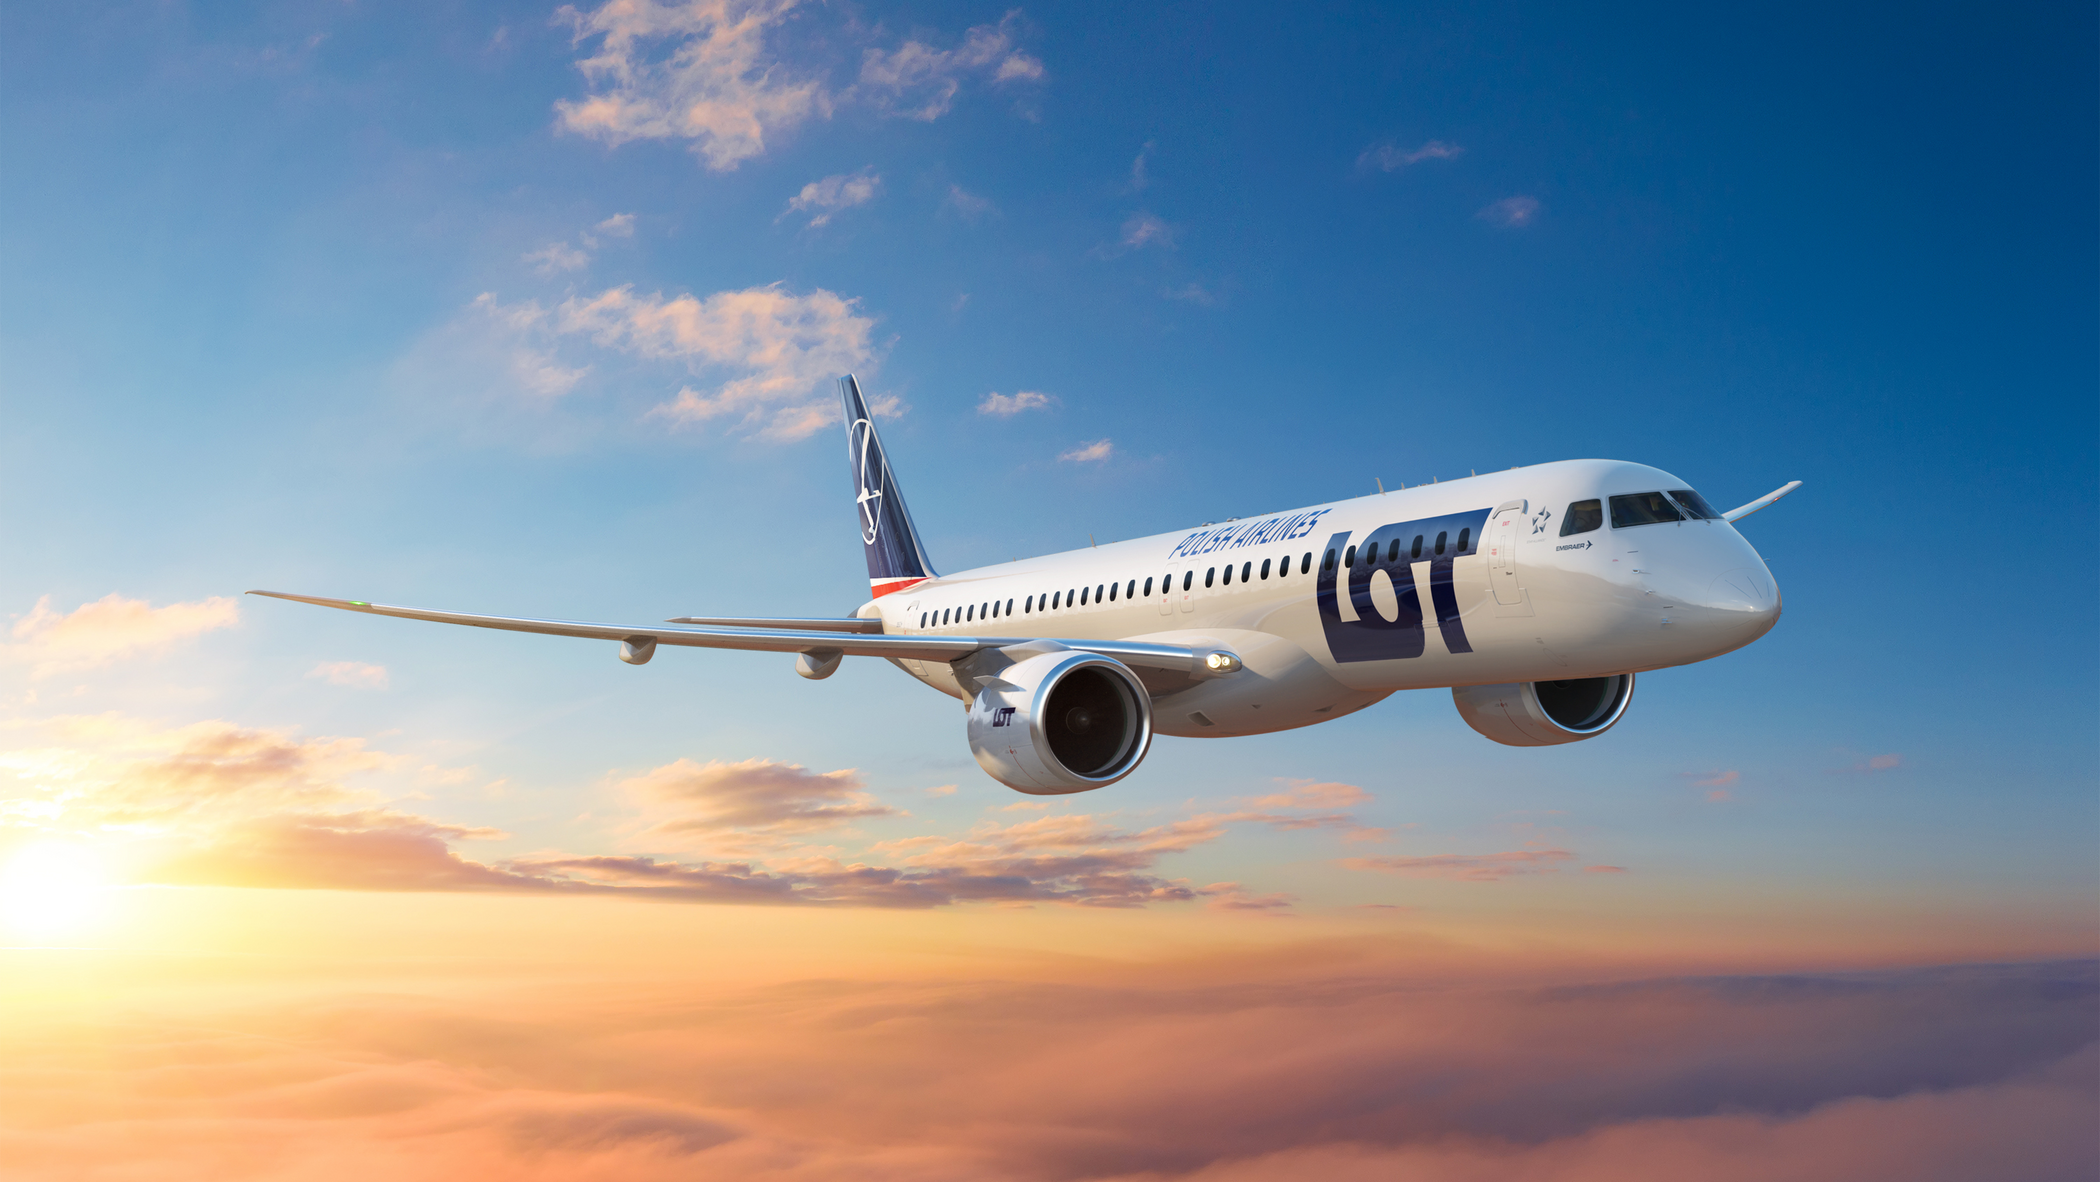 LOT Polish Airlines to add three Embraer E195-E2s to fleet